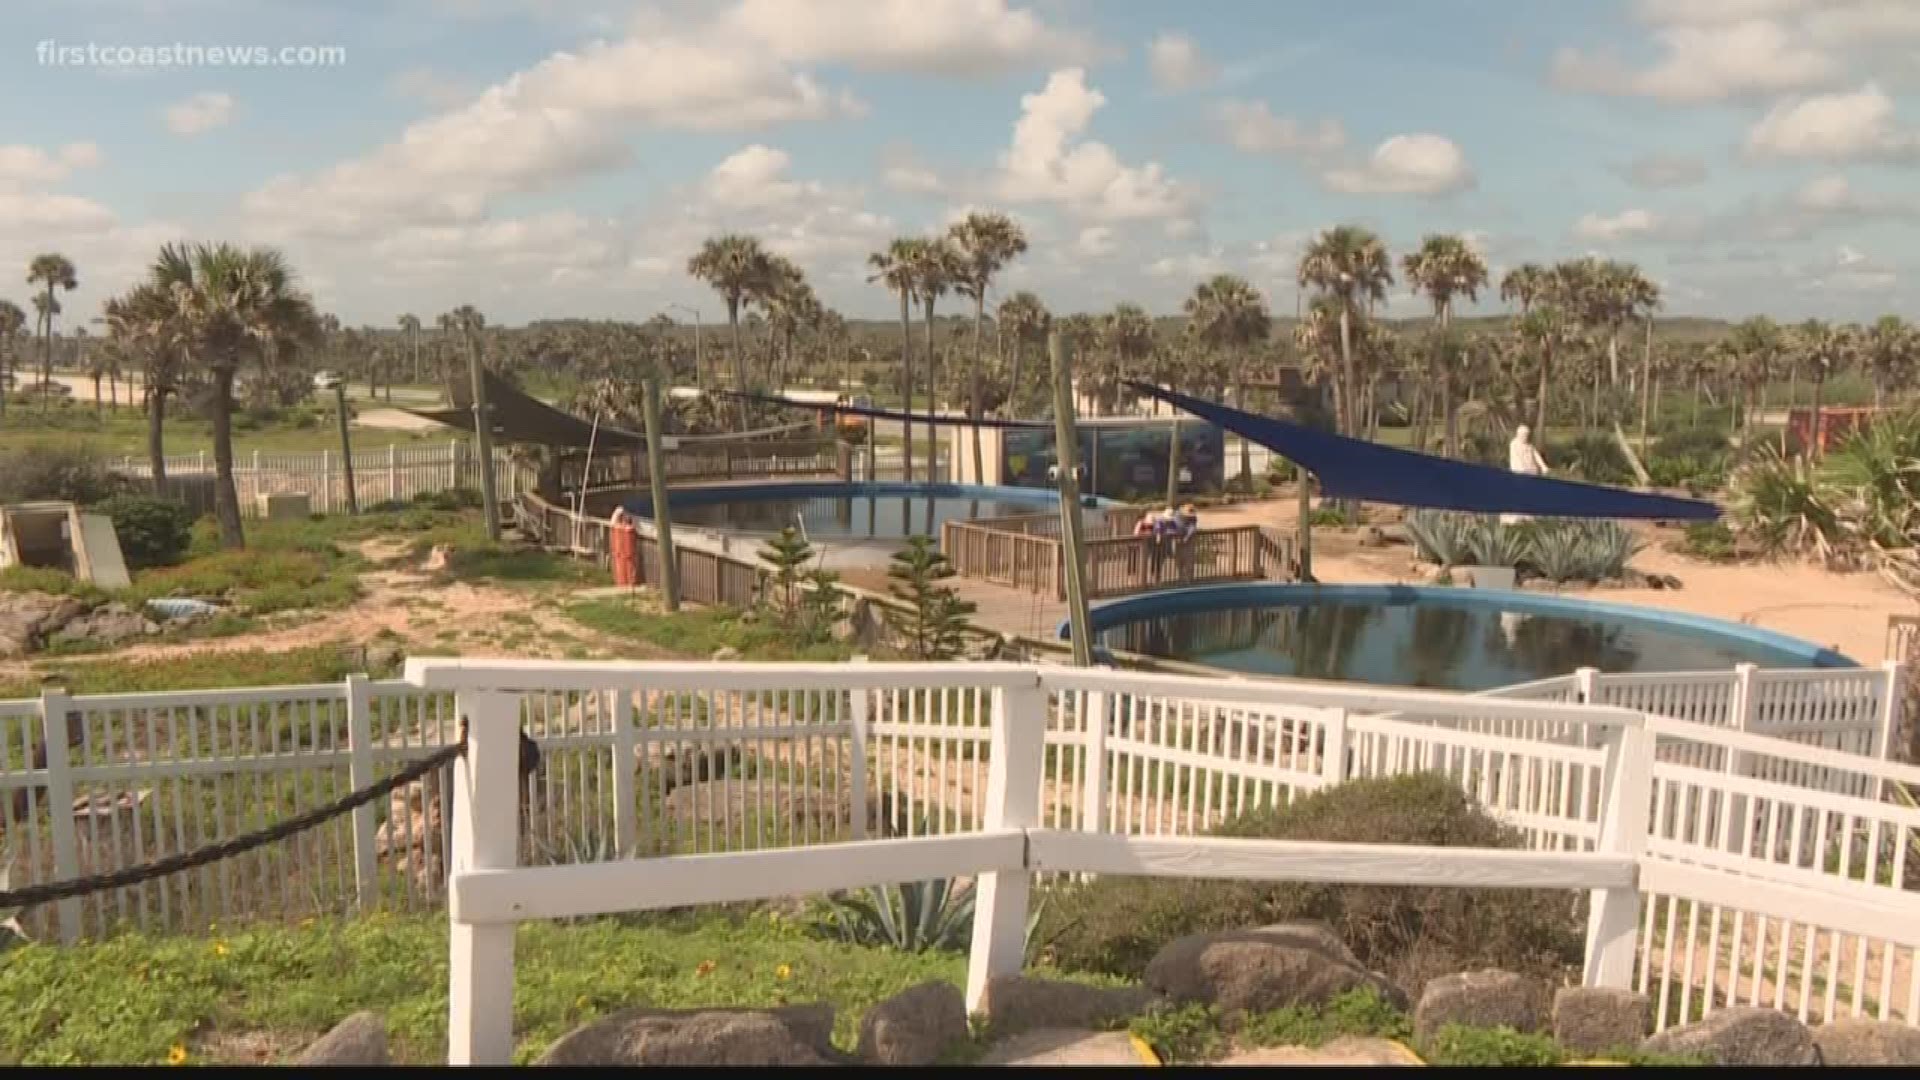 First Coast News has learned Marineland may be purchased by a Cancun-based attraction company which operates other attractions in the United States.